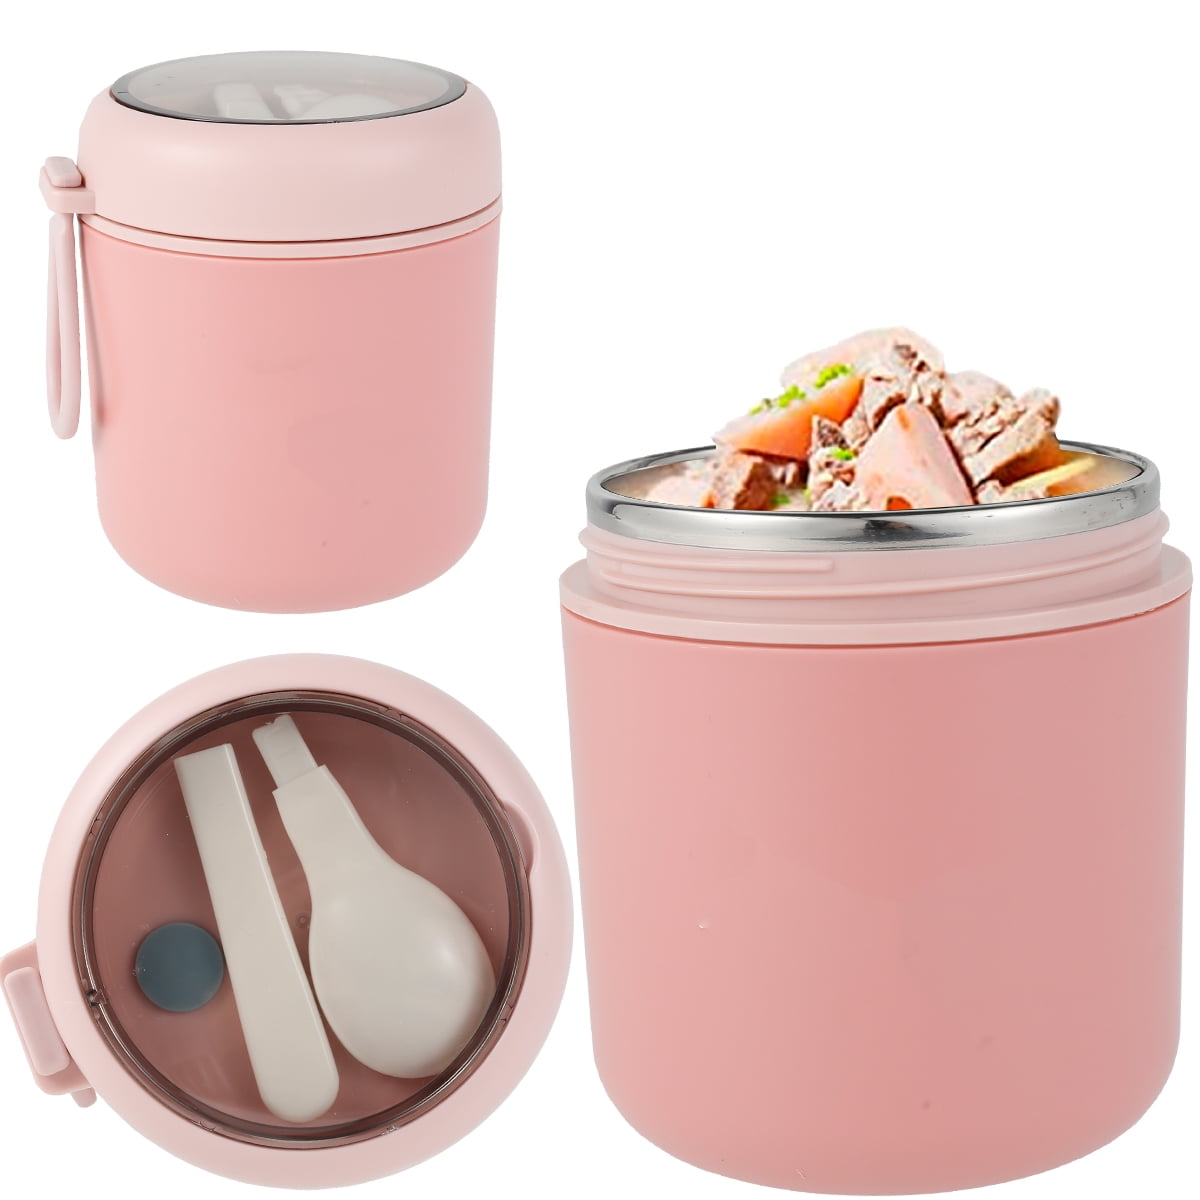 Morlike Hot Food Thermos Container for Kids Lunch Box, 8 oz Small Insulated  Vacuum Stainless Steel Thermal Soup Containers with Leakproof Lid (Mint